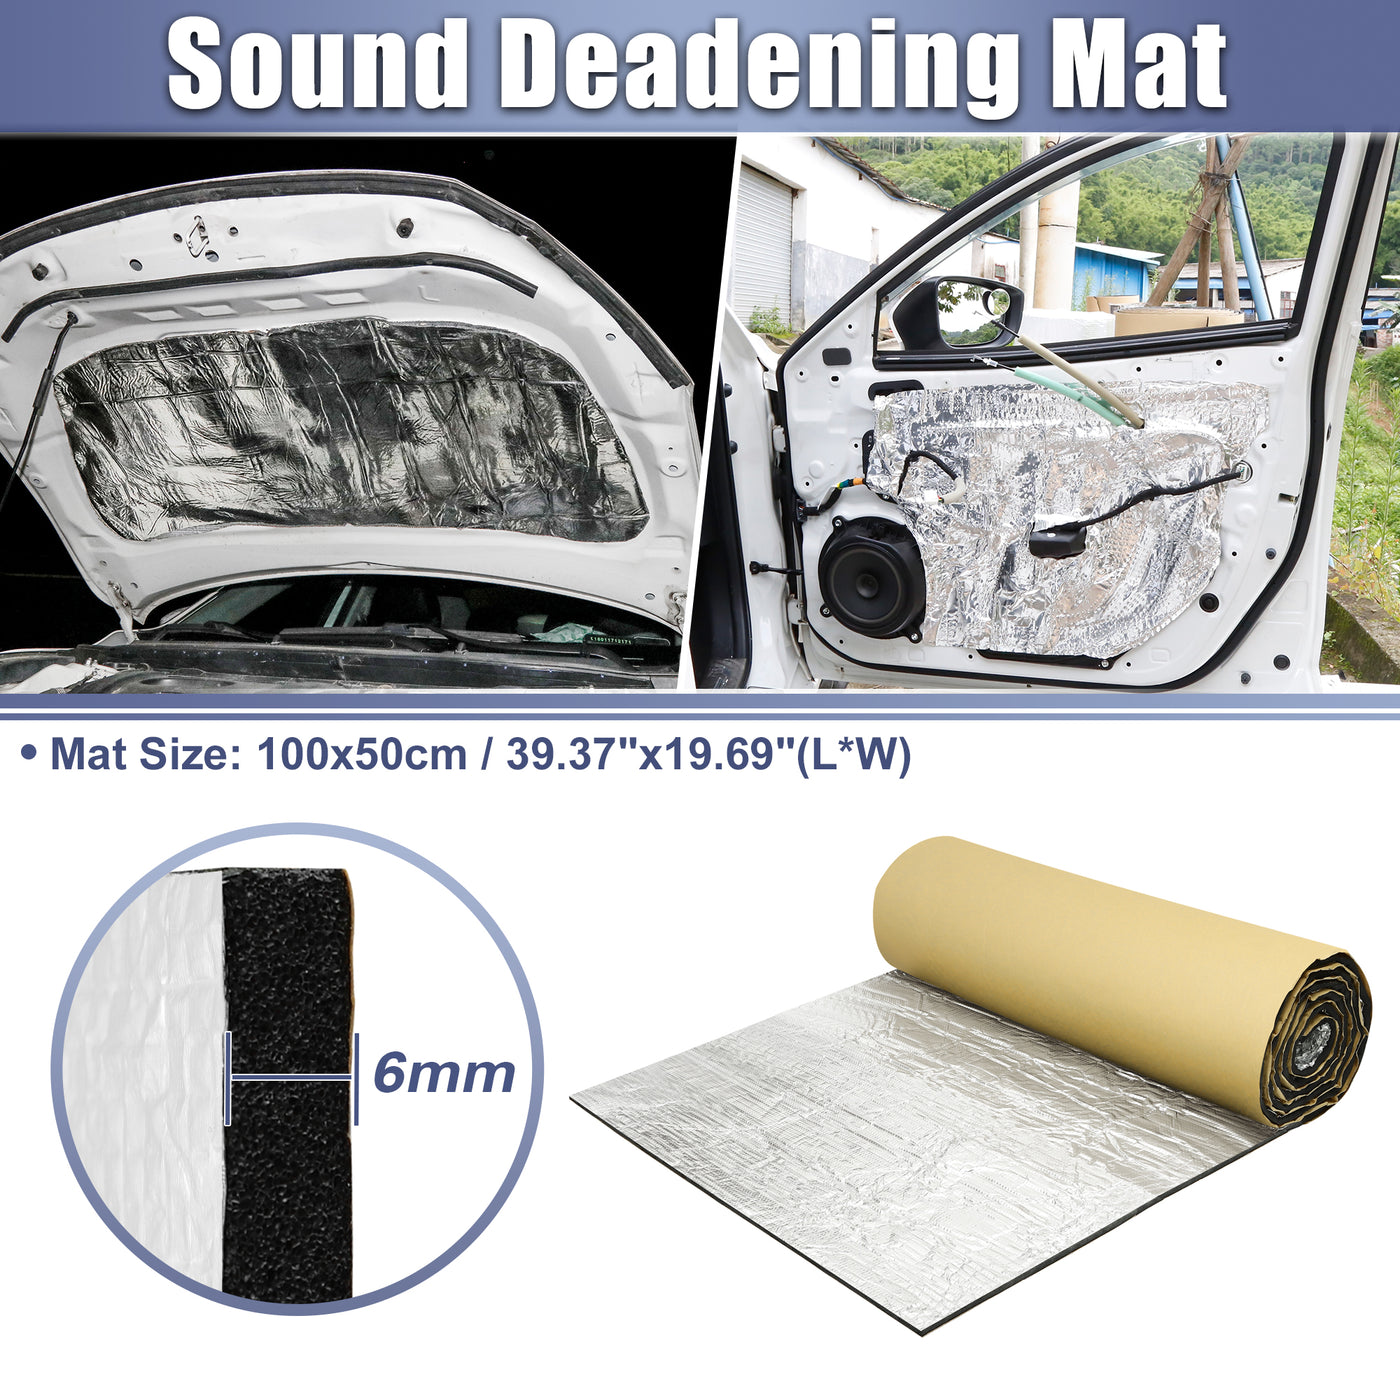 X AUTOHAUX 236mil 6mm 5.38sqft Car Sound Deadening Mat Aluminum Closed Cell Foam Heat Shield Material Damping Self Adhesive Universal for Hood Fender and Boat Engine Cover 39.37"x19.69"